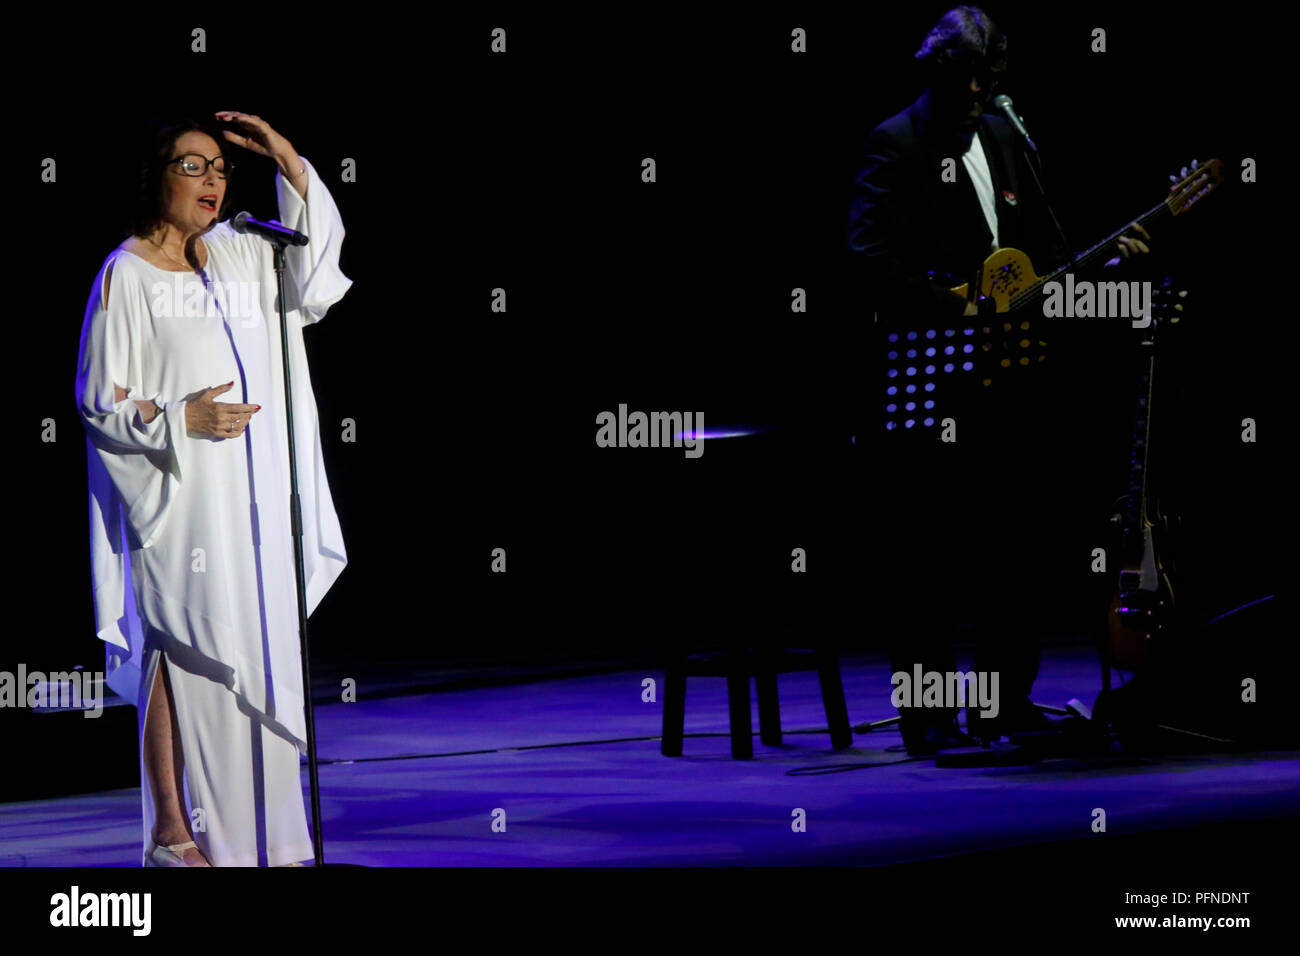 Byblos. 21st Aug, 2018. Greek singer Nana Mouskouri performs during the Byblos Festival in Lebanon's northern city Byblos on Aug. 21, 2018. Credit: Bilal Jawich/Xinhua/Alamy Live News Stock Photo